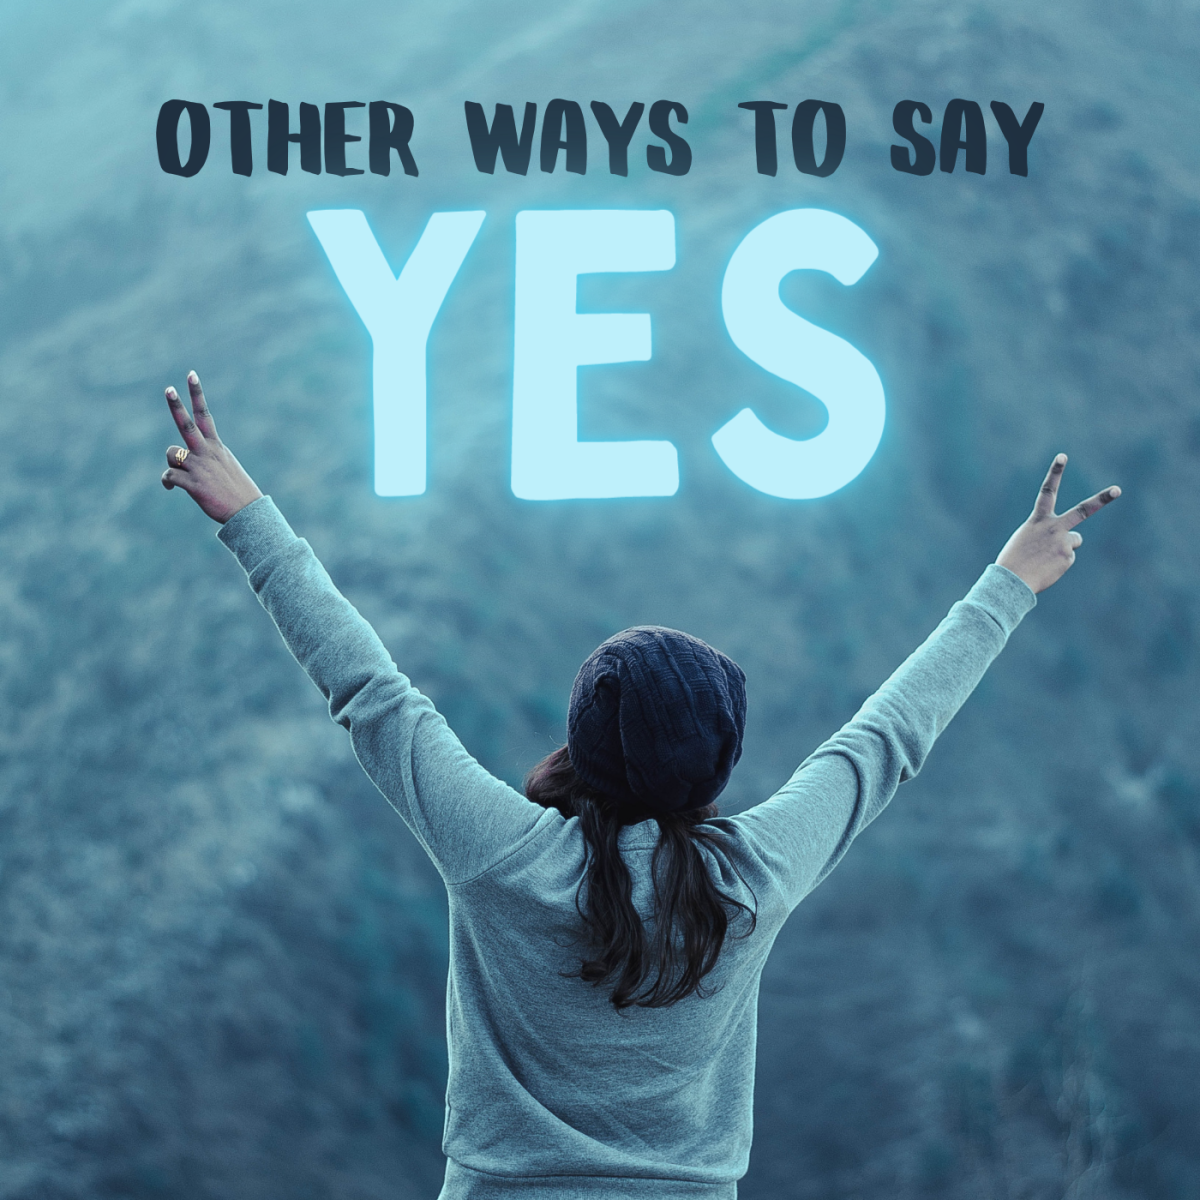 Yep, yup, uh-huh! Get some ideas for other ways to say the word "yes"!